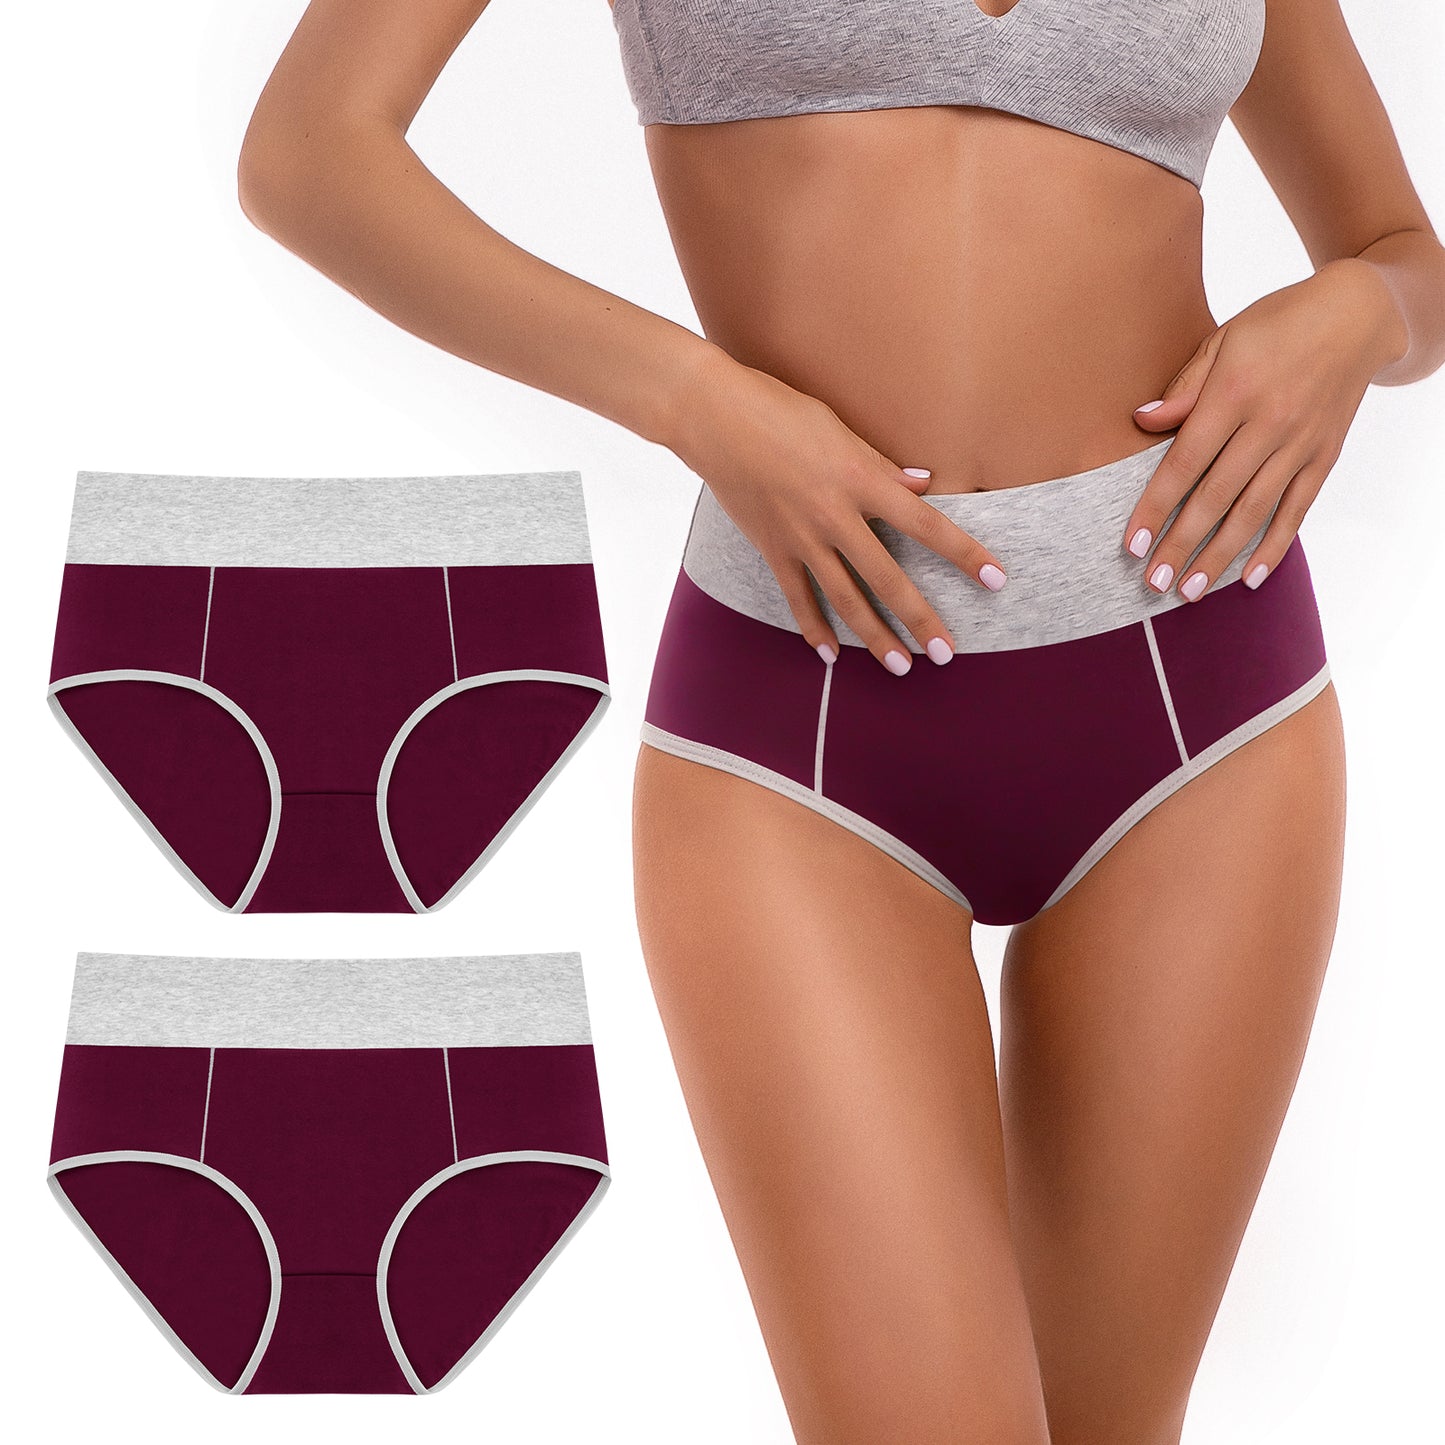 SINOPHANT Ladies Cotton Knickers Hight Waisted Knickers Multipack Buy2Get1  Free